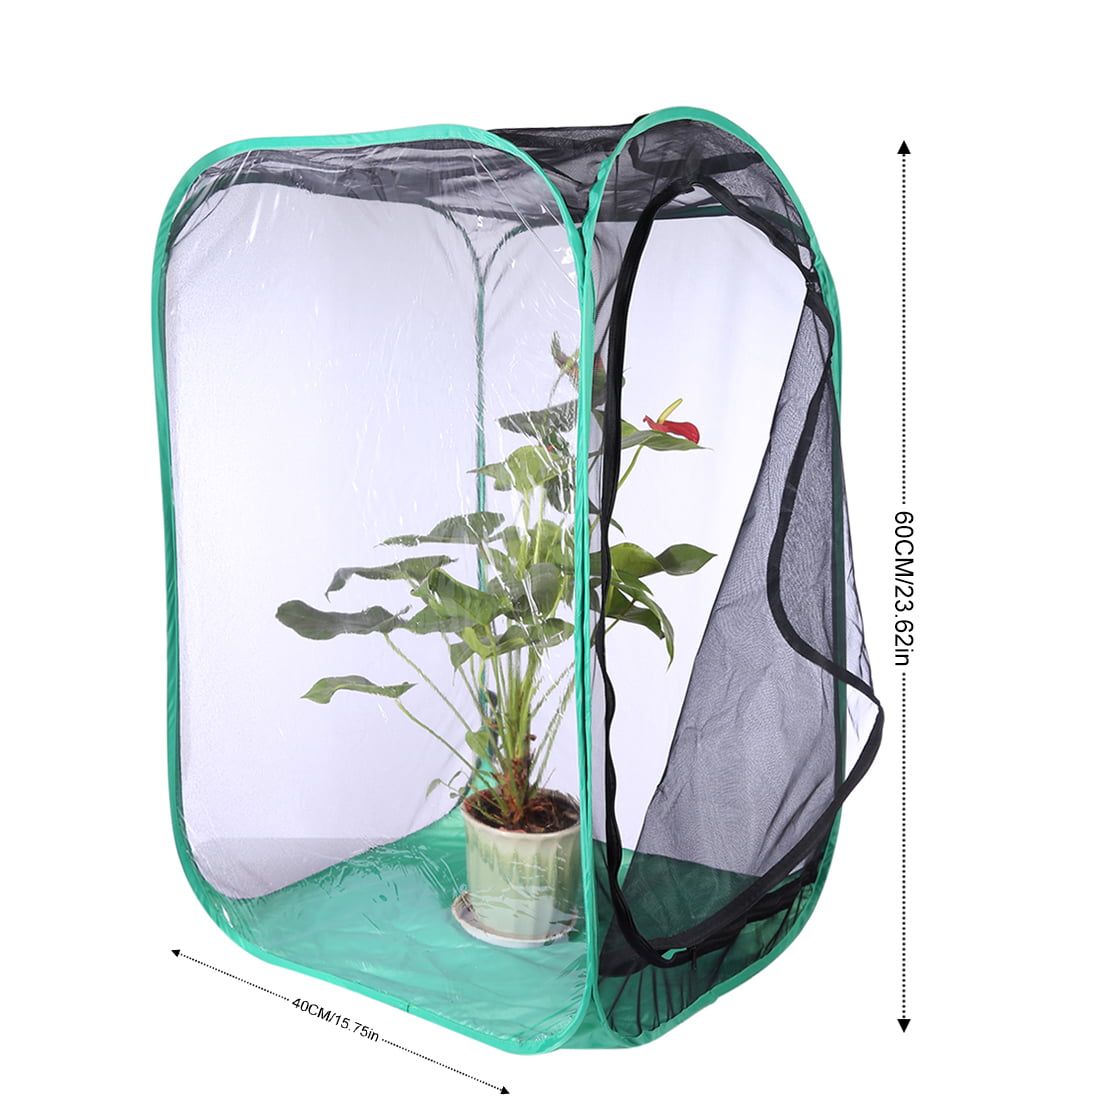 BCP Insect Butterfly Plant Habitat Terrarium Clear Window Mesh Zip Net Cage 12 x 12 x 12 